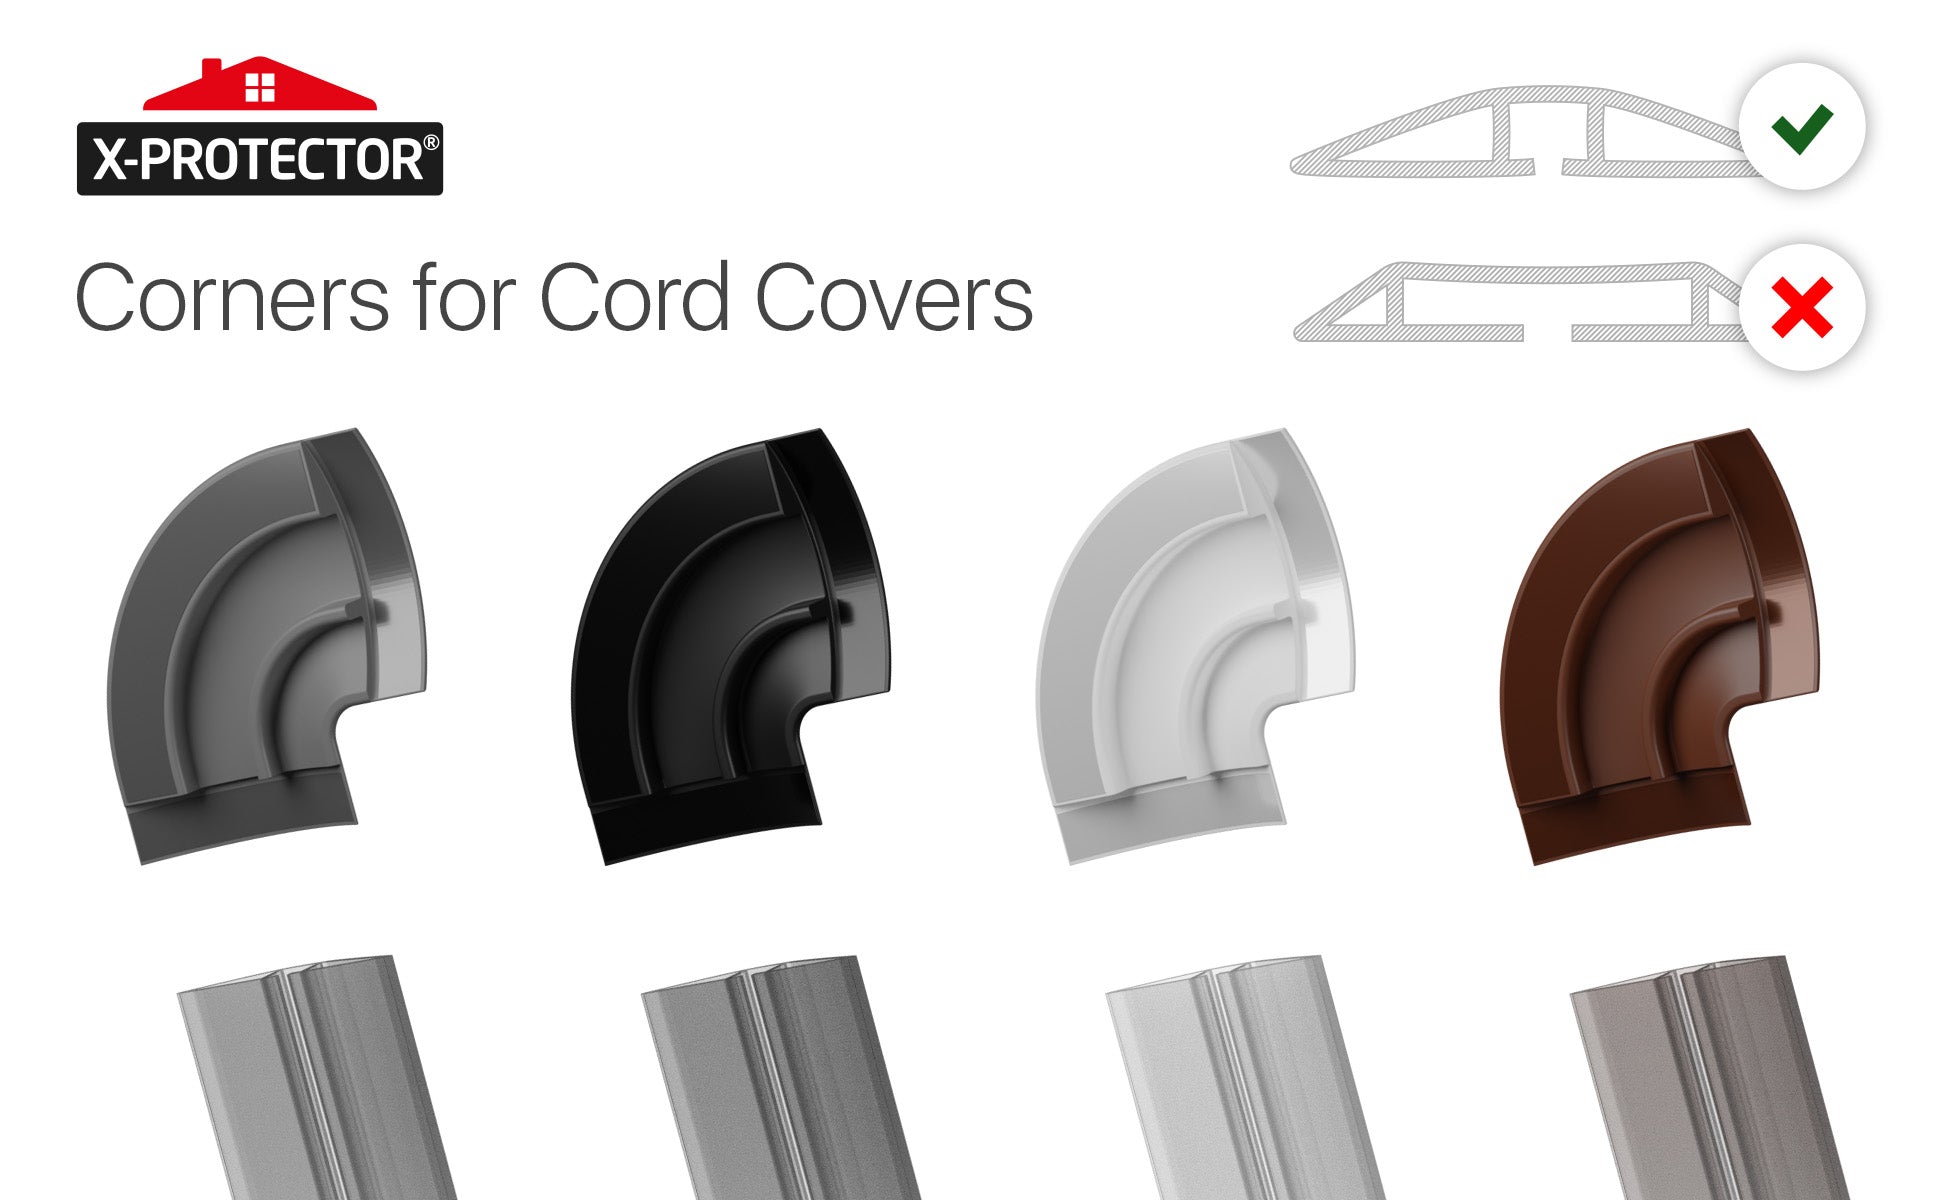 Corners for Floor Cord Covers